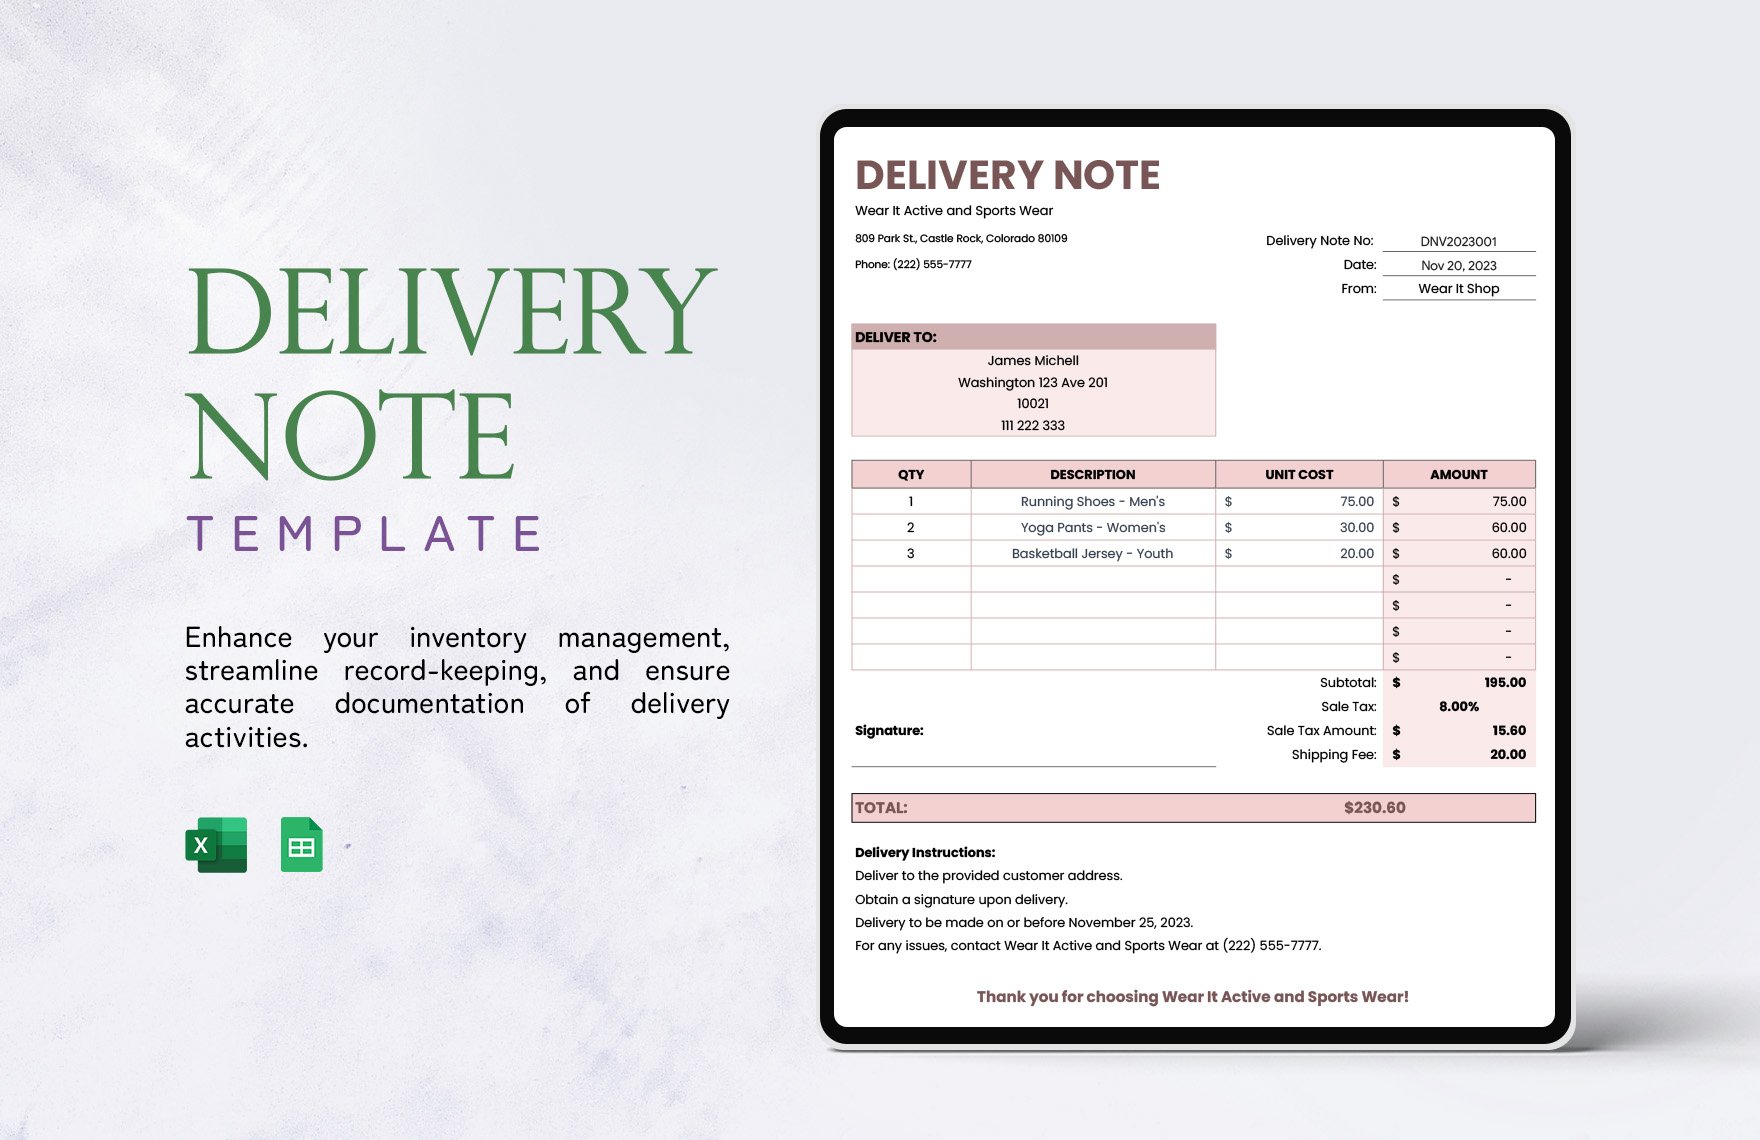 Free Delivery Note Template